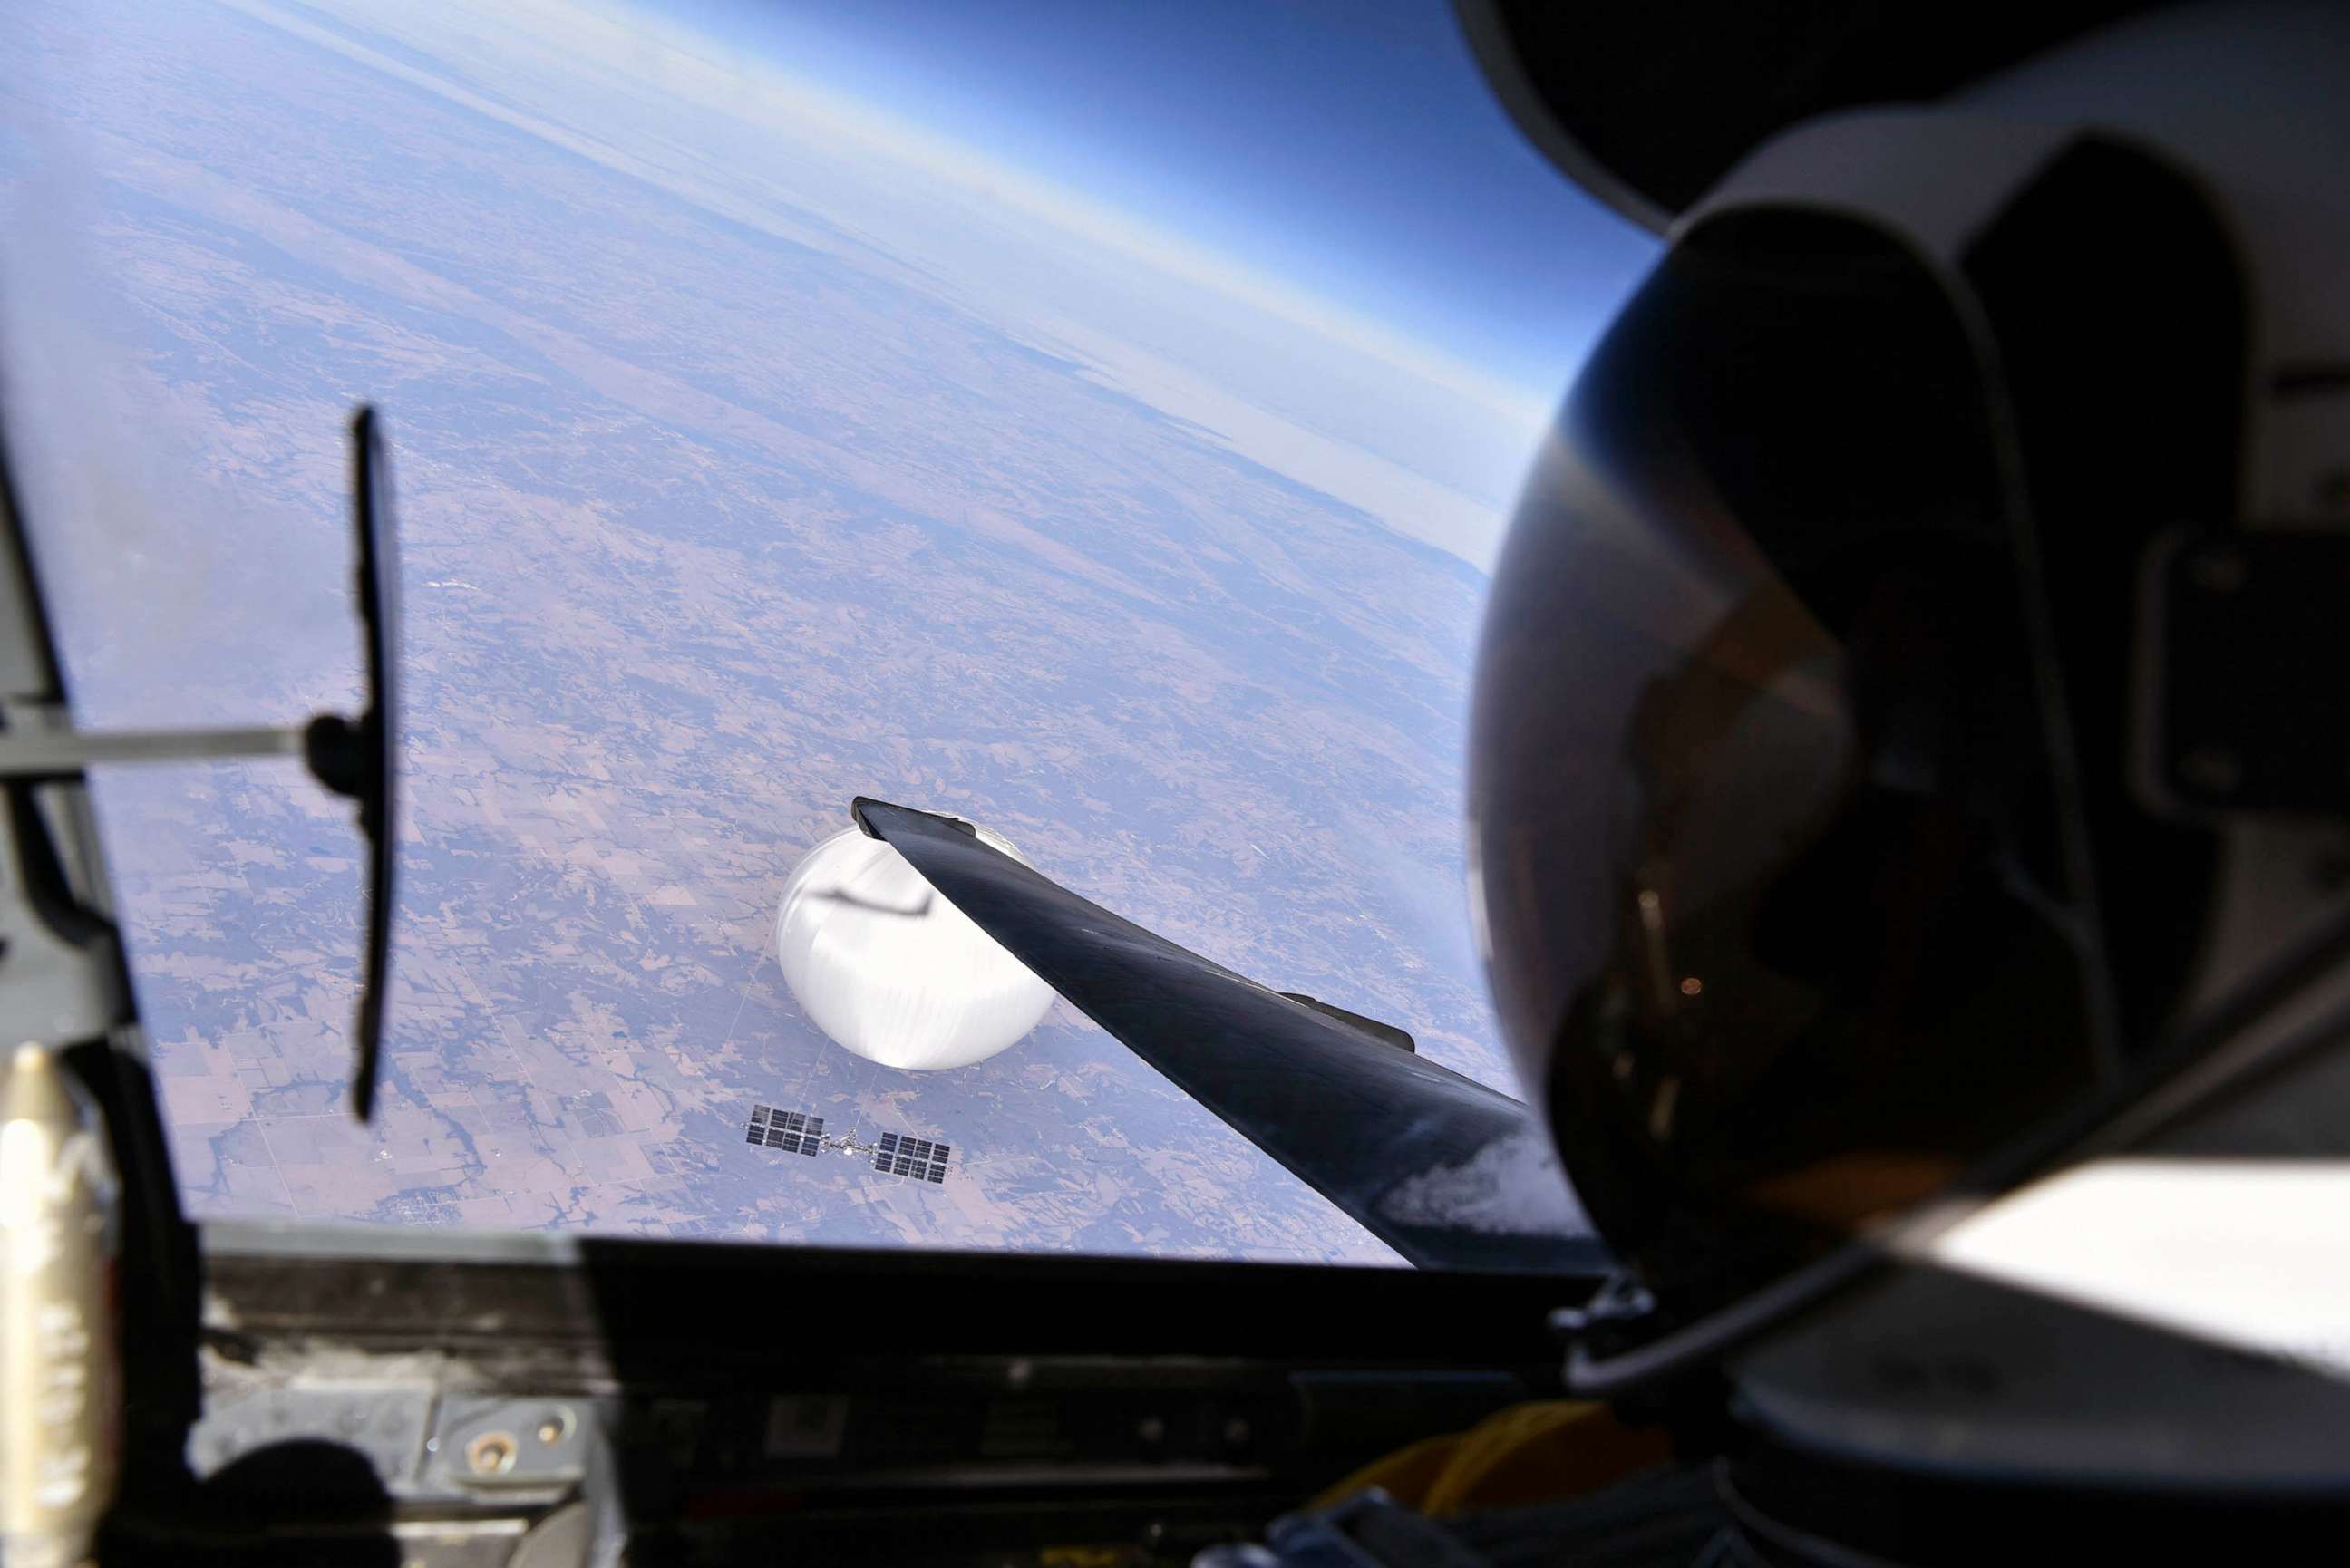 PHOTO: A U.S. Air Force pilot looked down at the suspected Chinese surveillance balloon as it hovered over the Central Continental United States, Feb. 3, 2023.